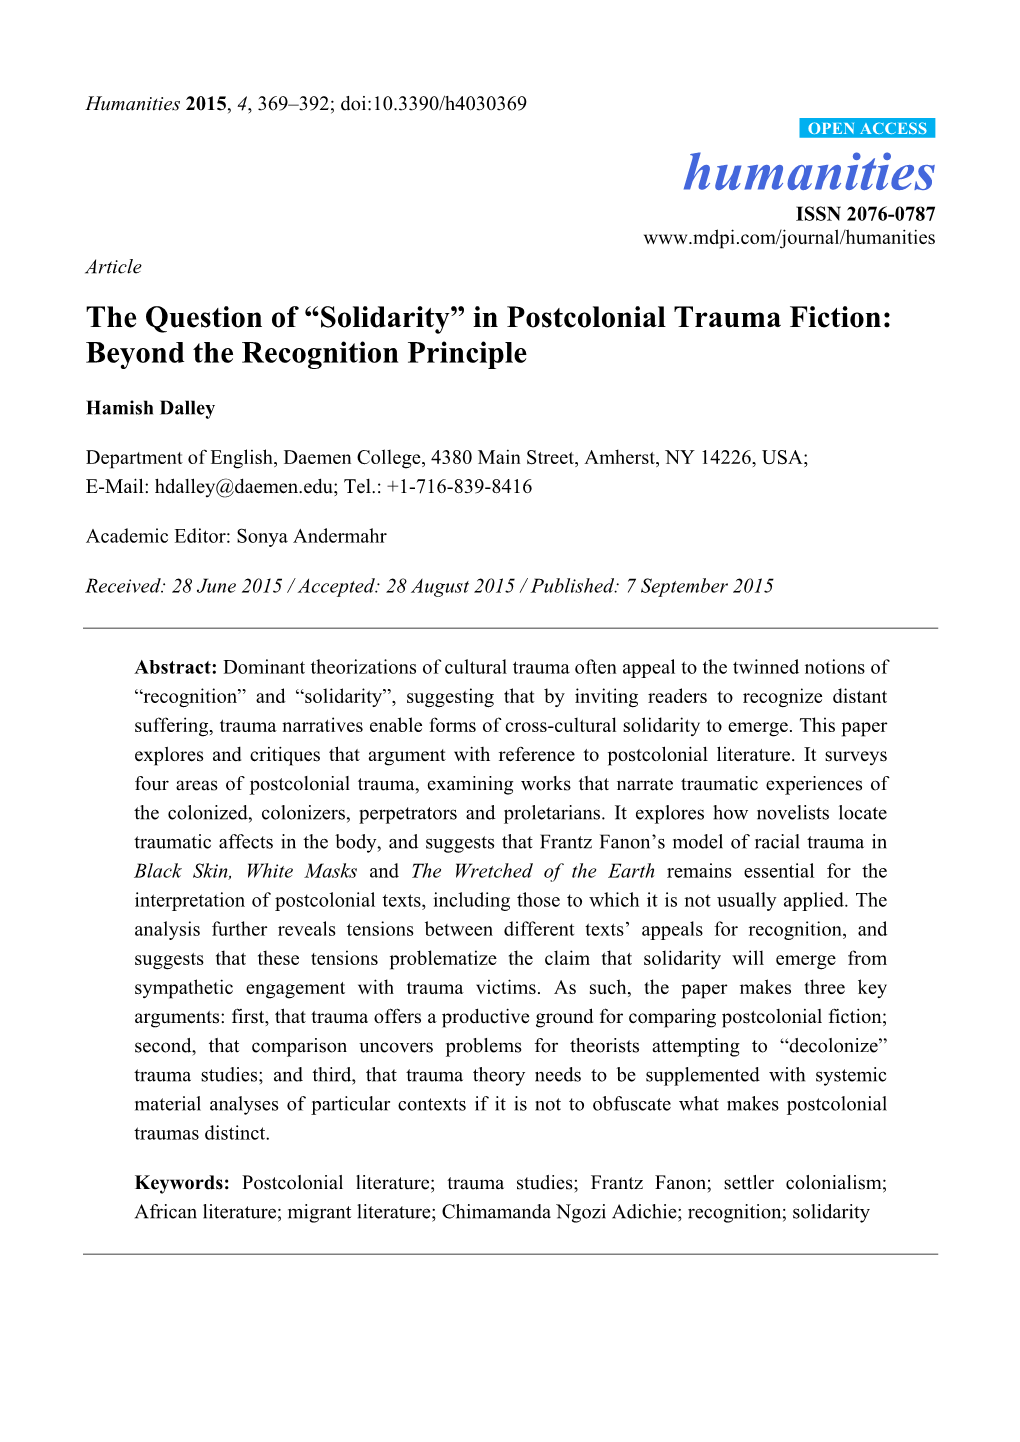 The Question of “Solidarity” in Postcolonial Trauma Fiction: Beyond the Recognition Principle